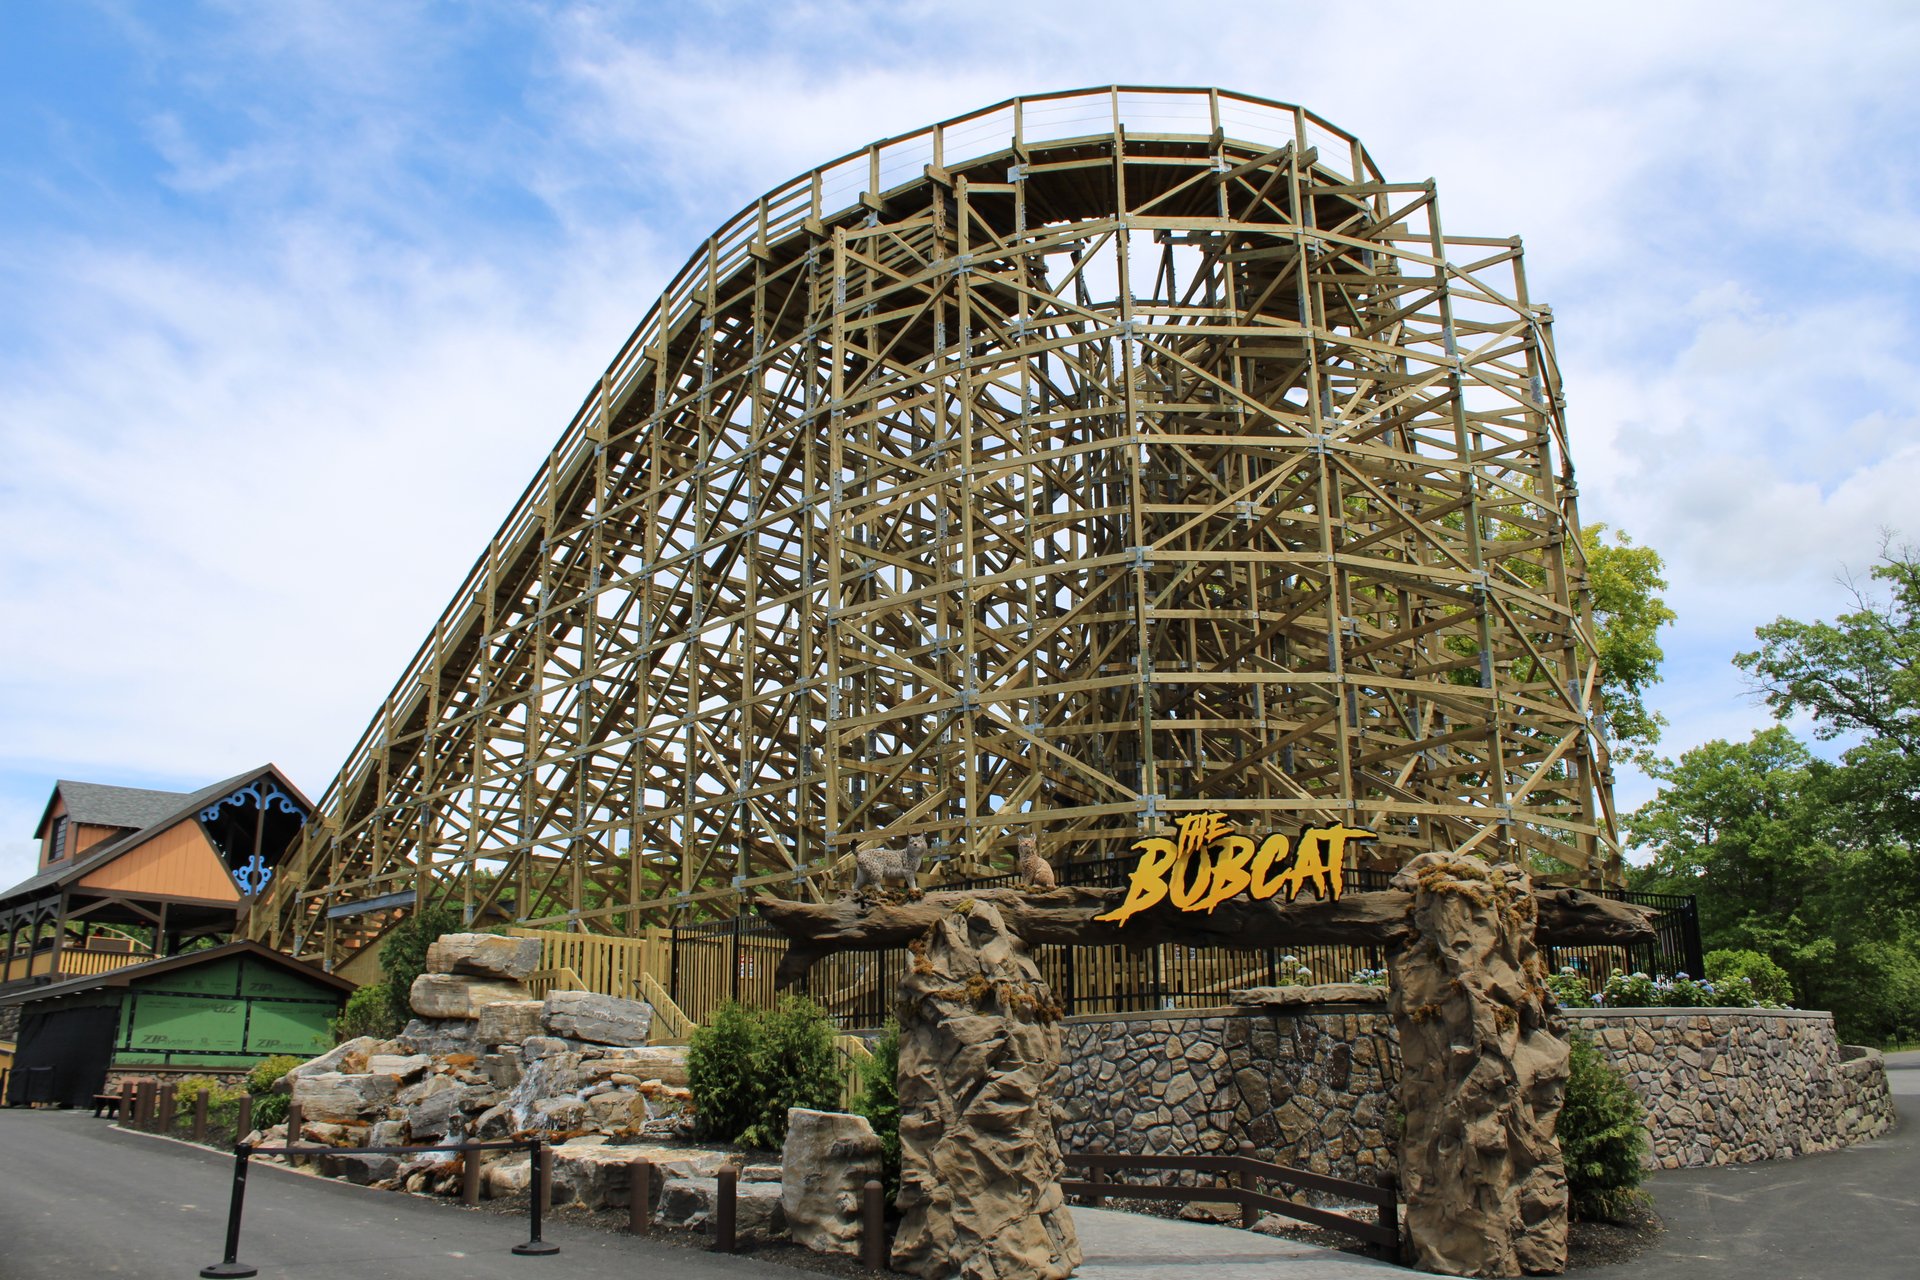 The Bobcat Roller Coaster Opens at Six Flags Great Escape